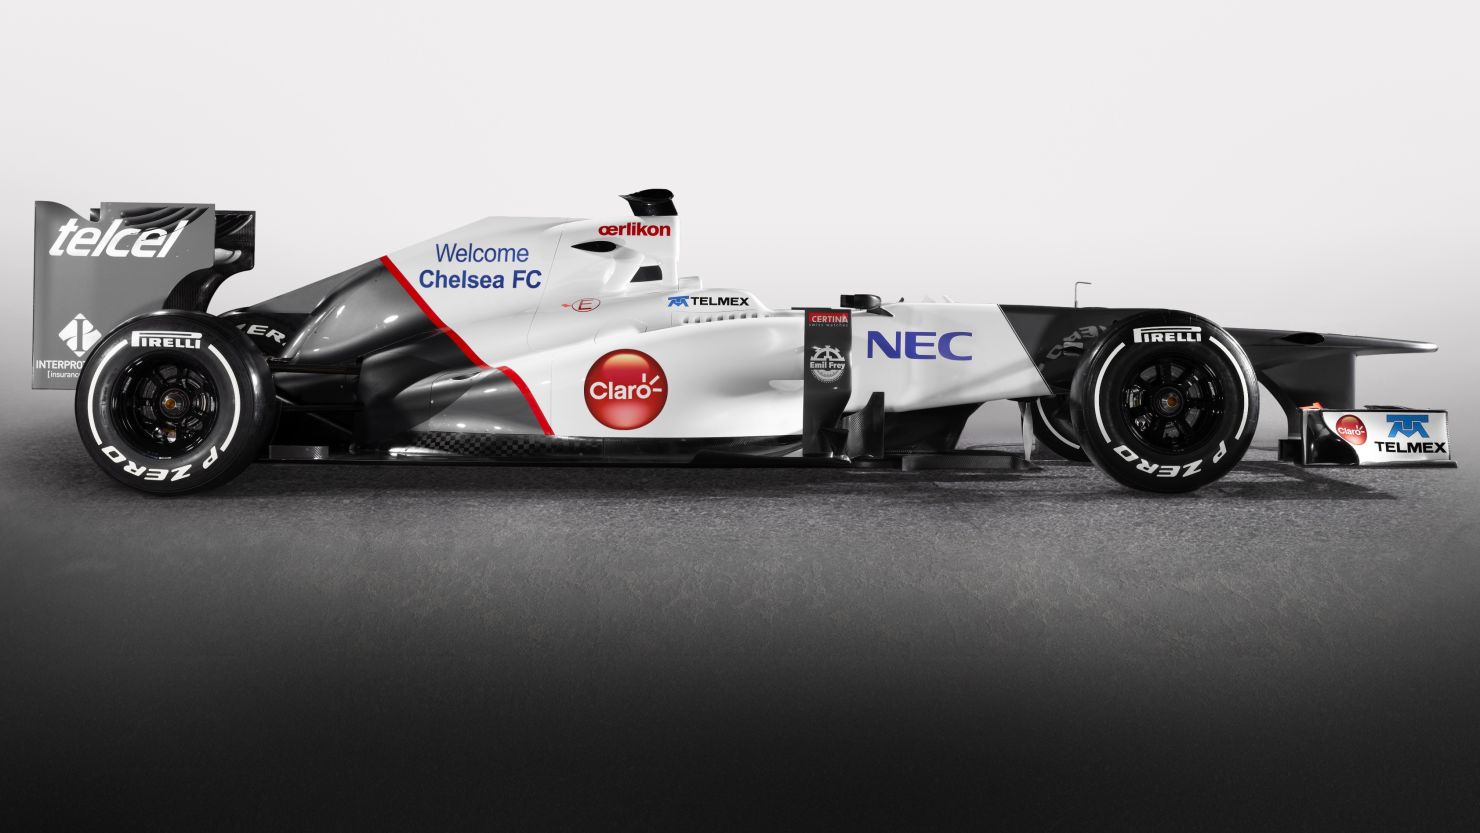 The new Sauber cars with Chelsea FC branding will be revealed at the Spanish Grand Prix.